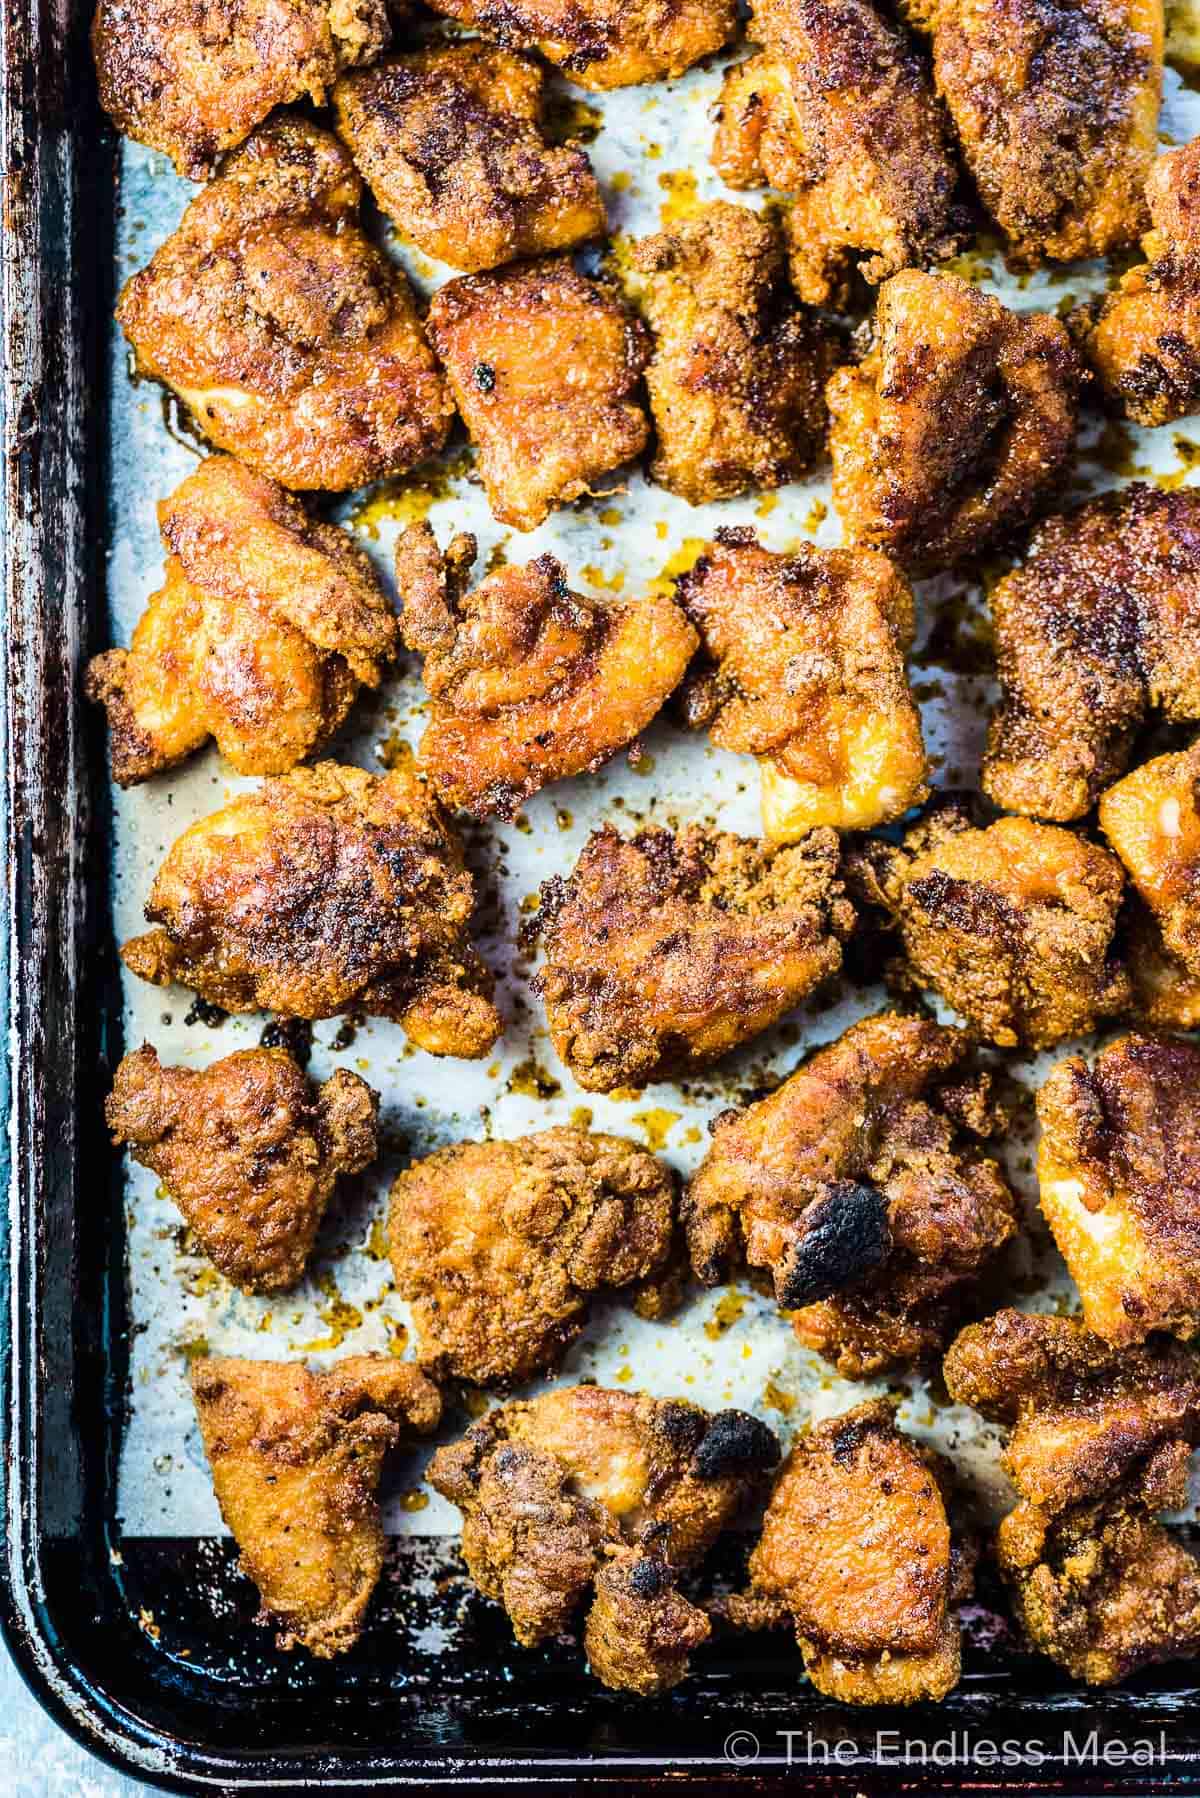 A baking tray filled with crispy easy chicken bites.